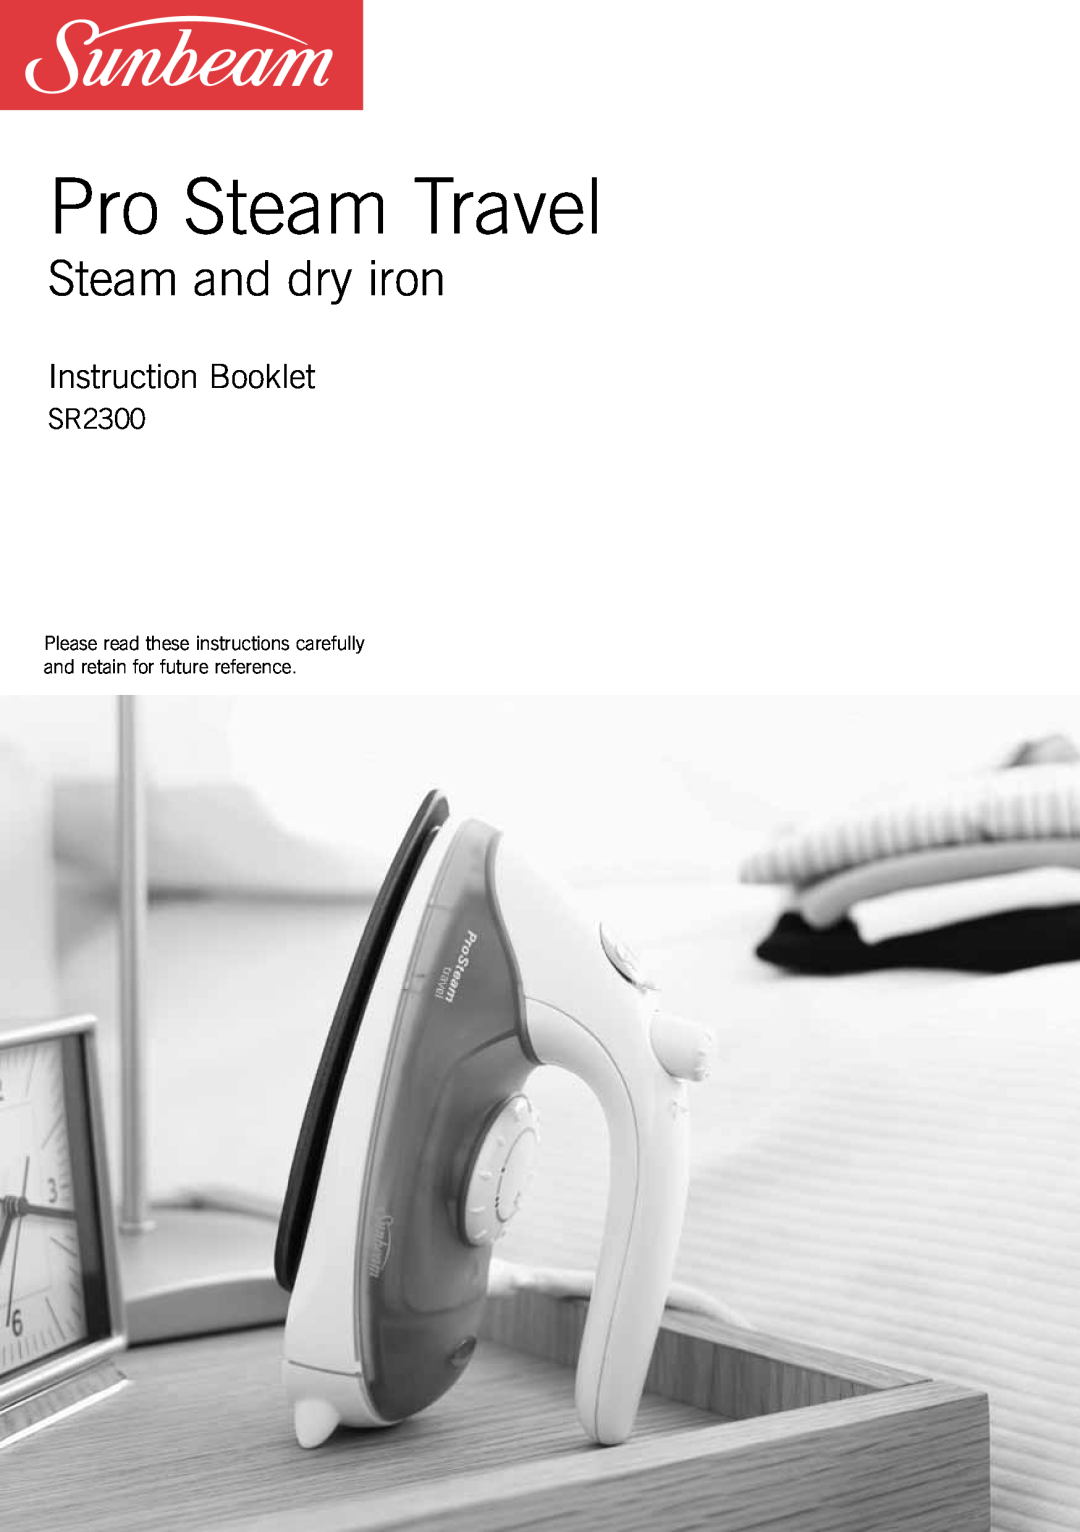 Sunbeam SR2300 manual Pro Steam Travel, Steam and dry iron, Instruction Booklet 